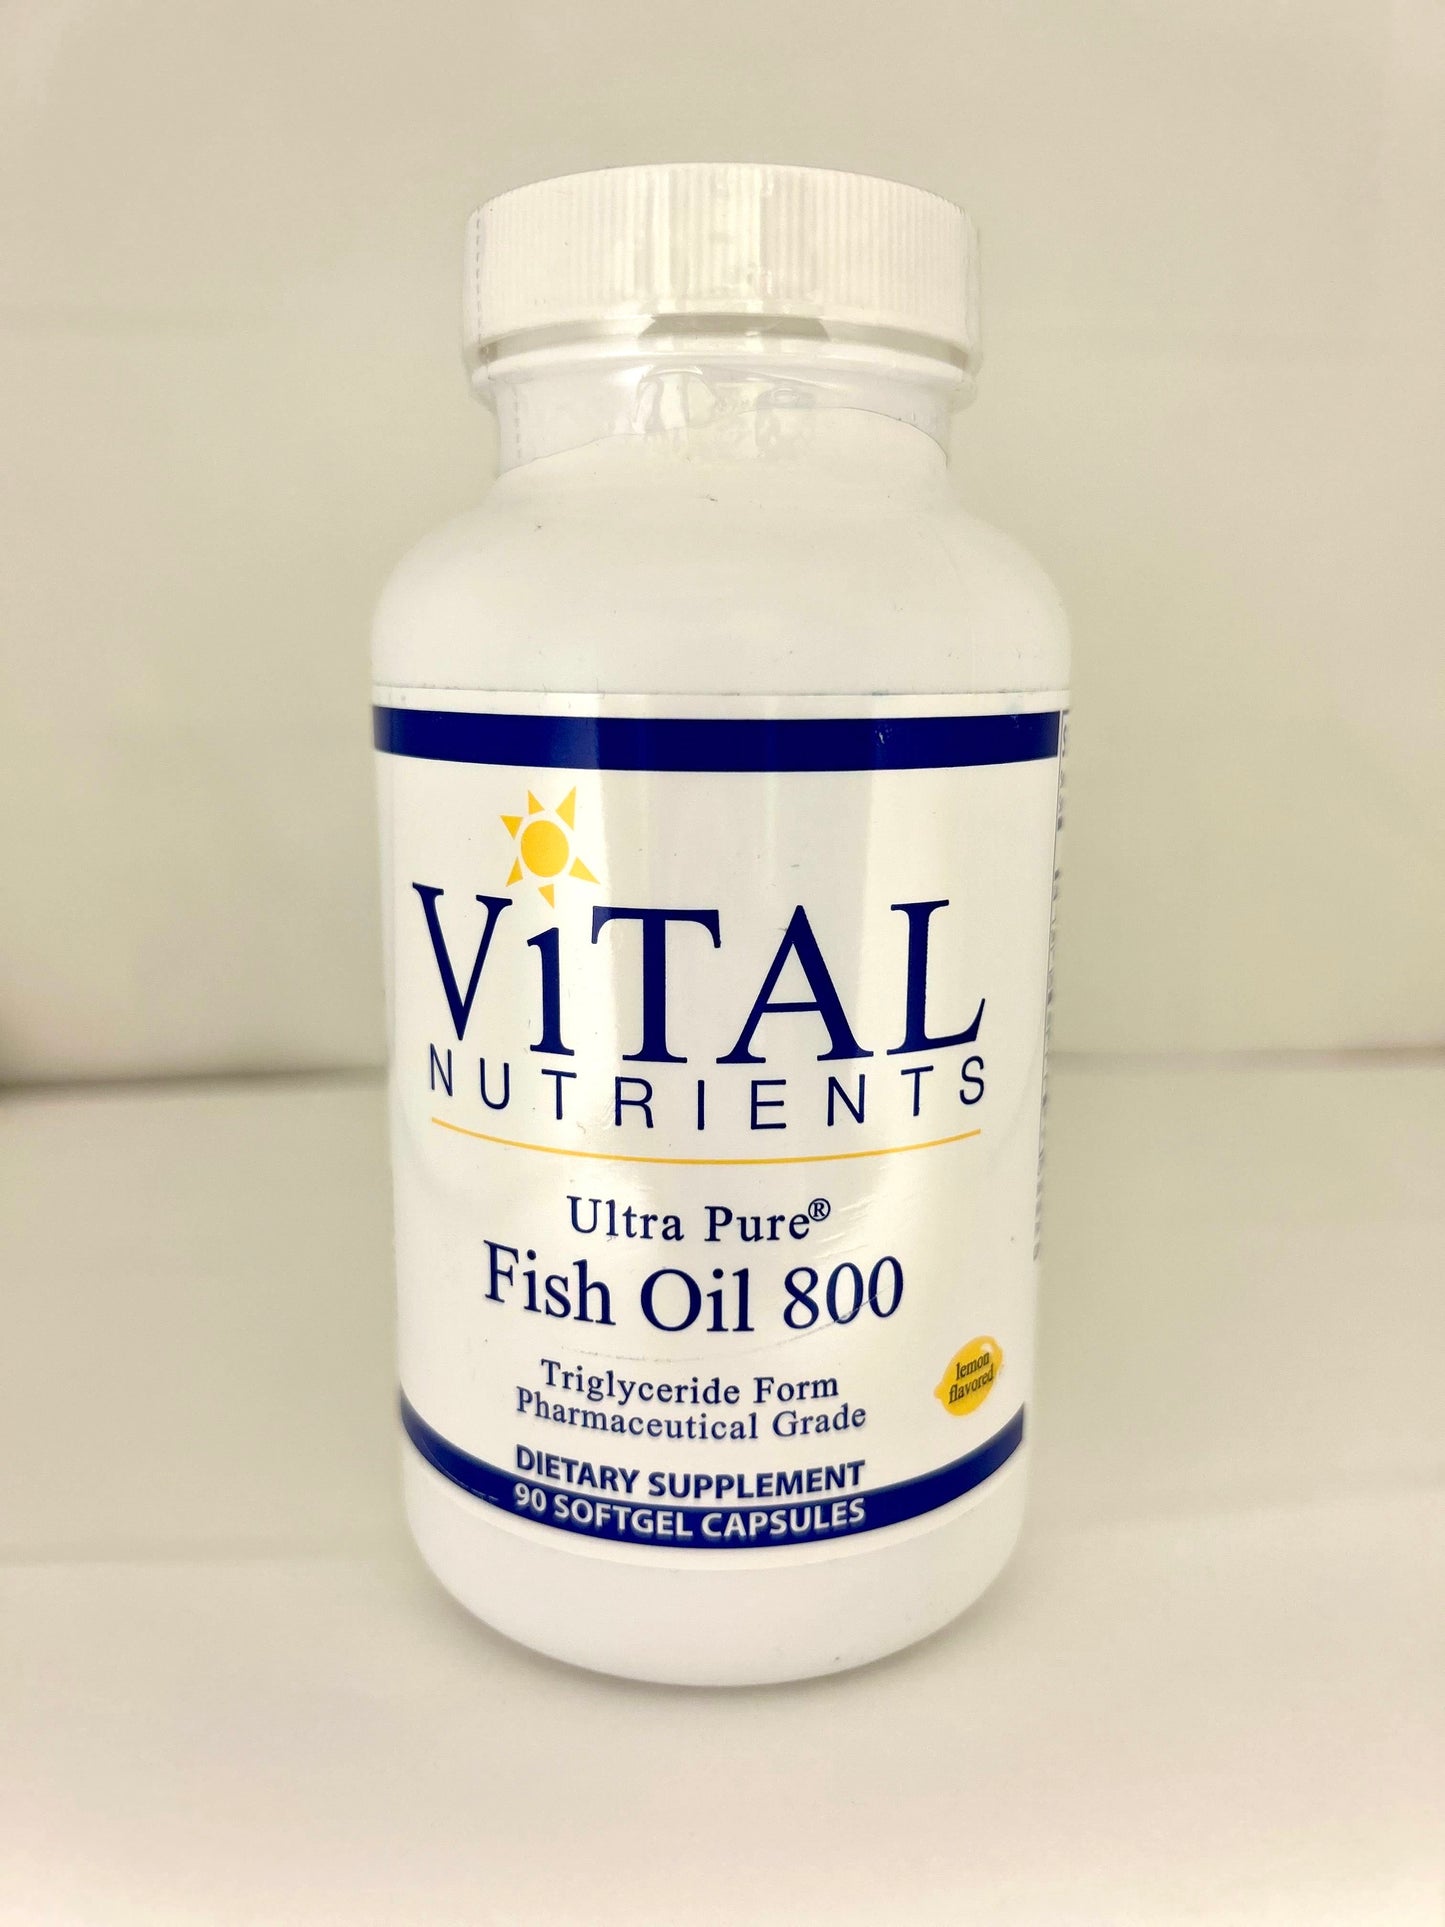 Ultra Pure Fish oil with triglyceride